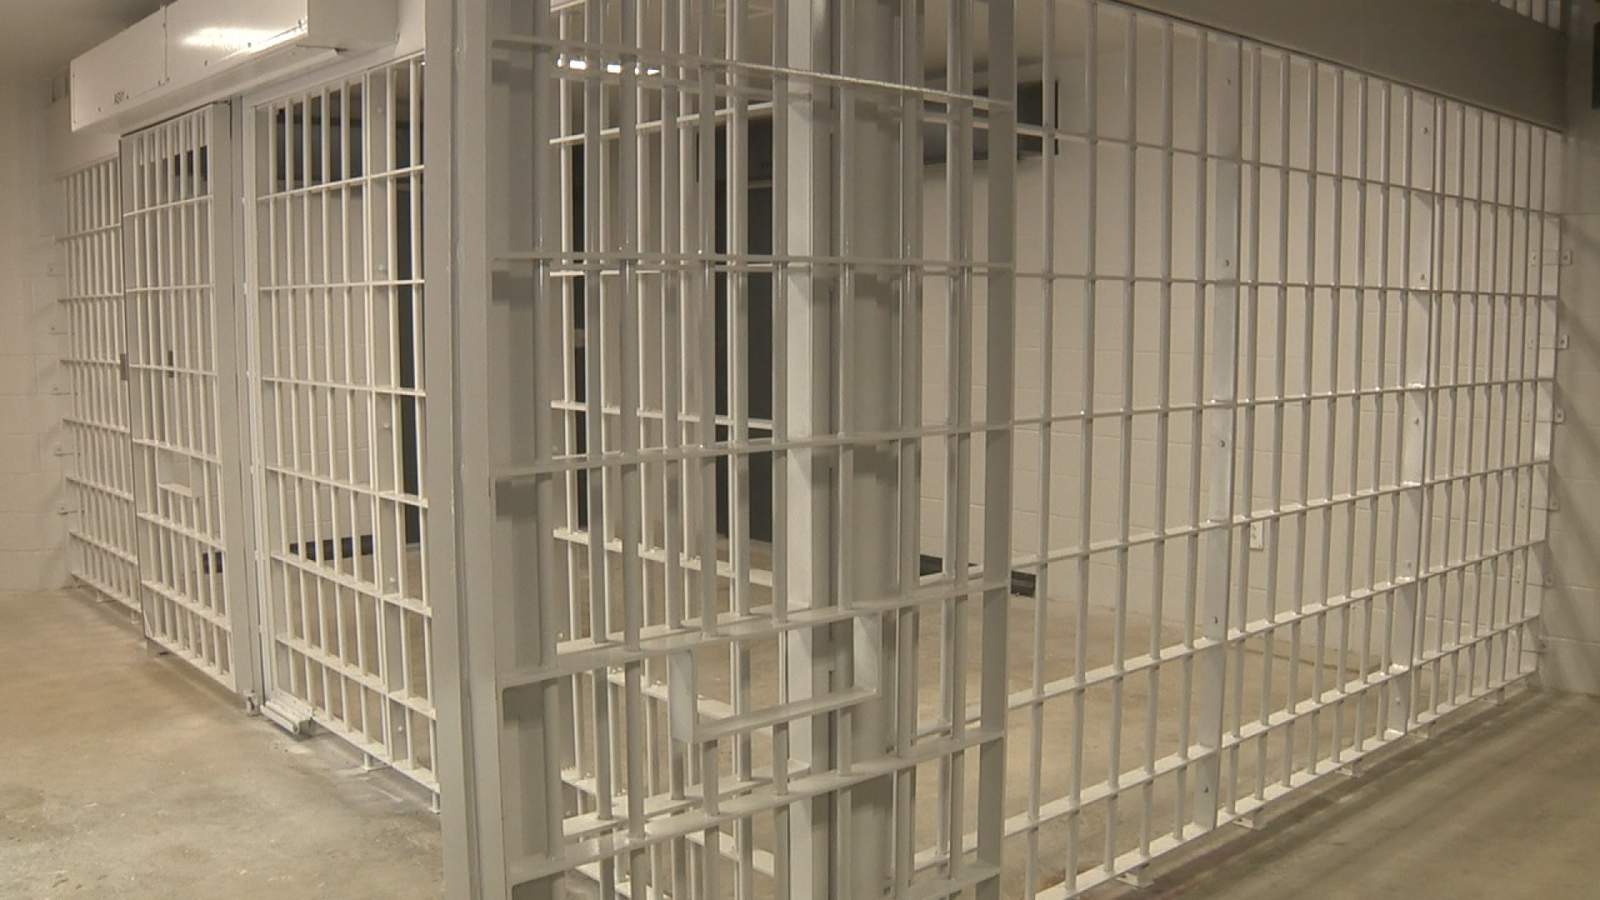 Comal County to begin moving inmates into new $72 million jail next week